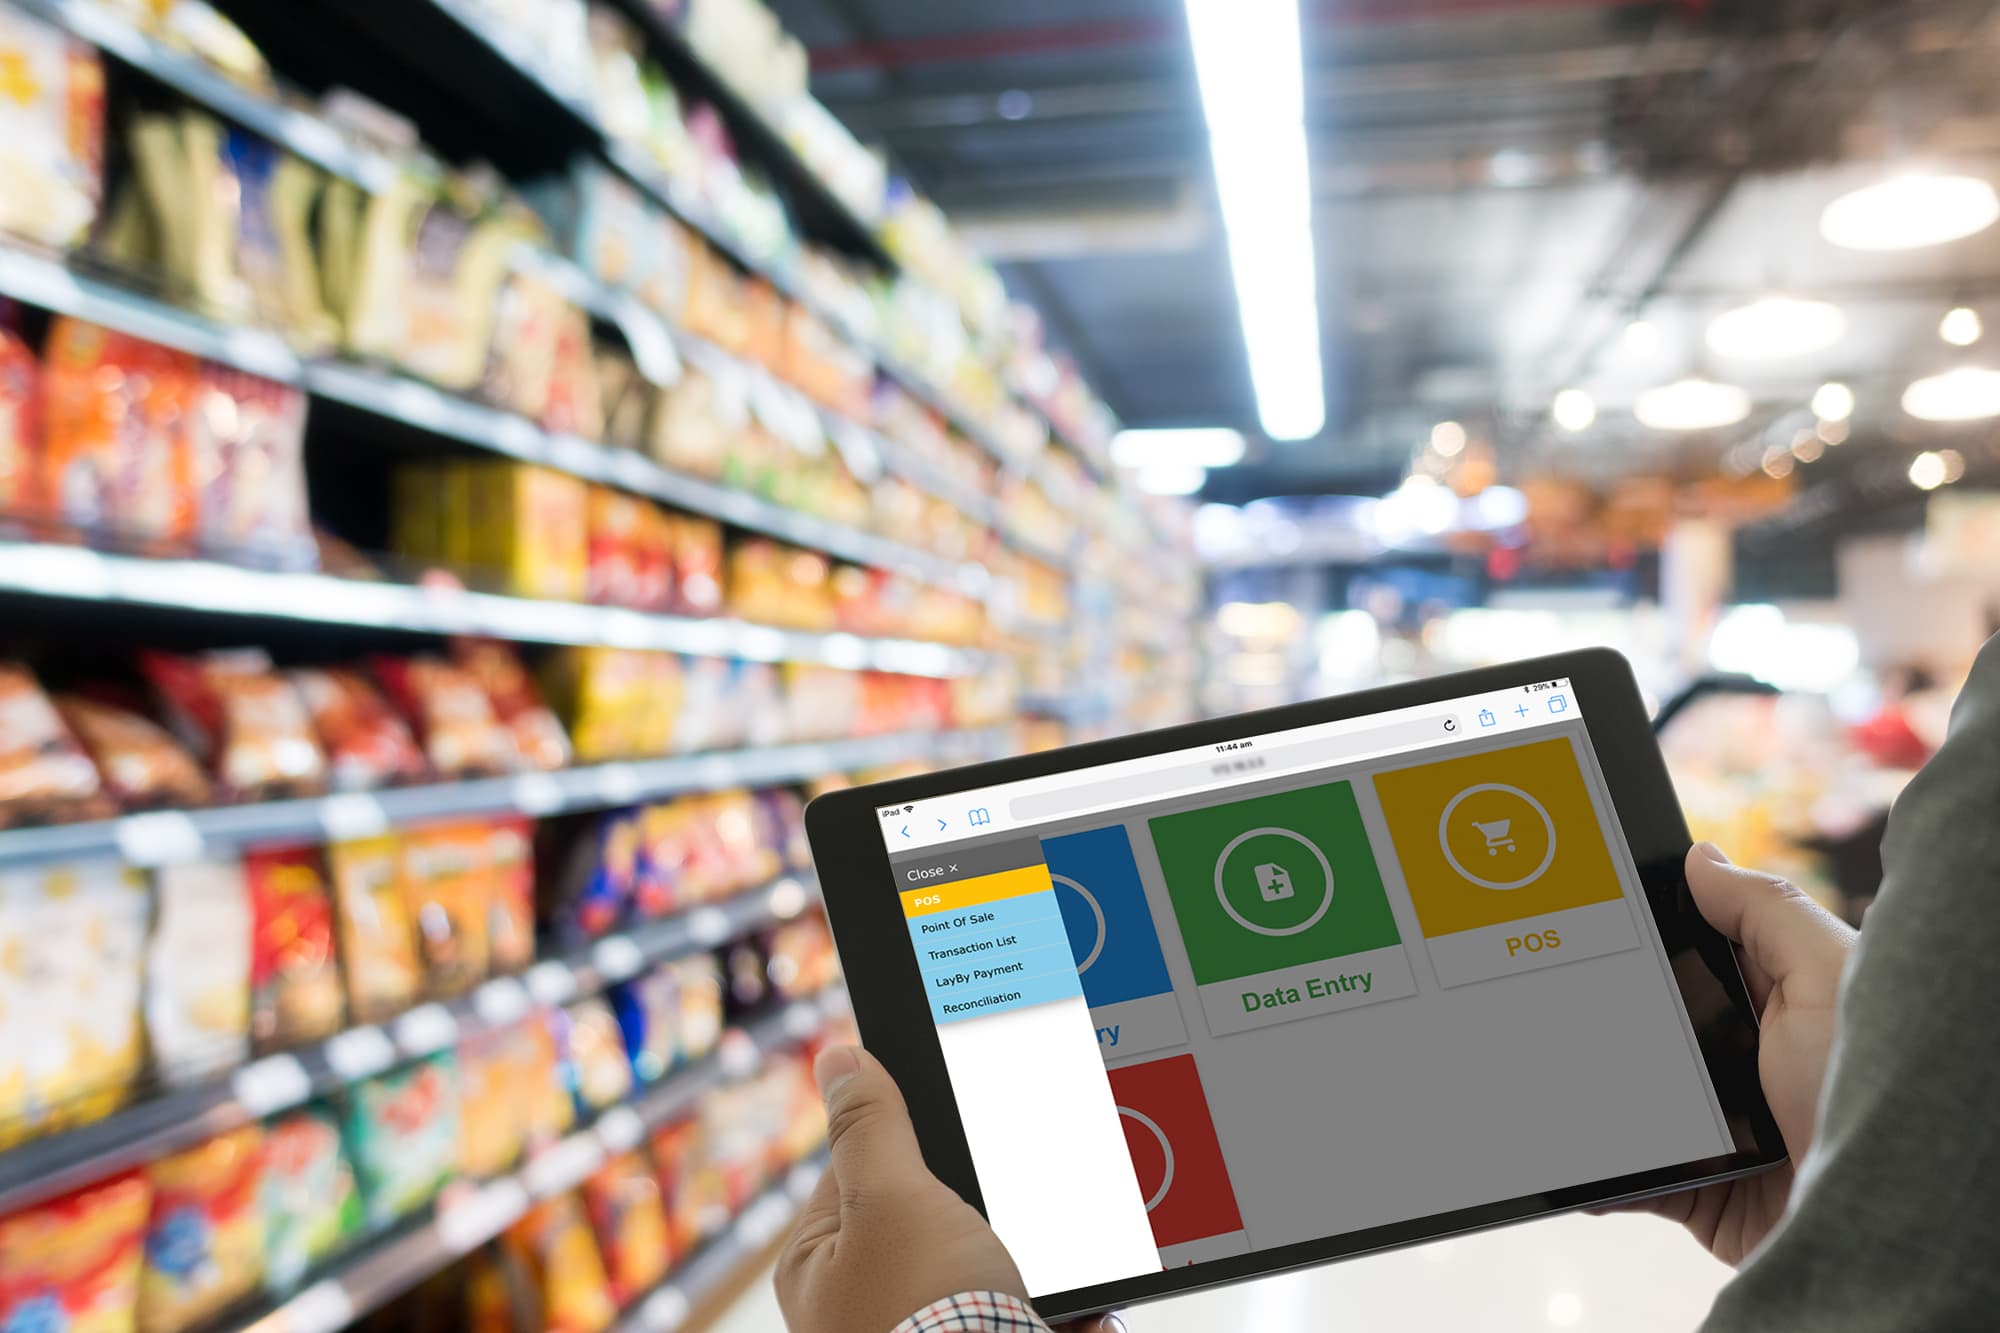 Maximise product availability while speeding up service in your convenience store or supermarket 